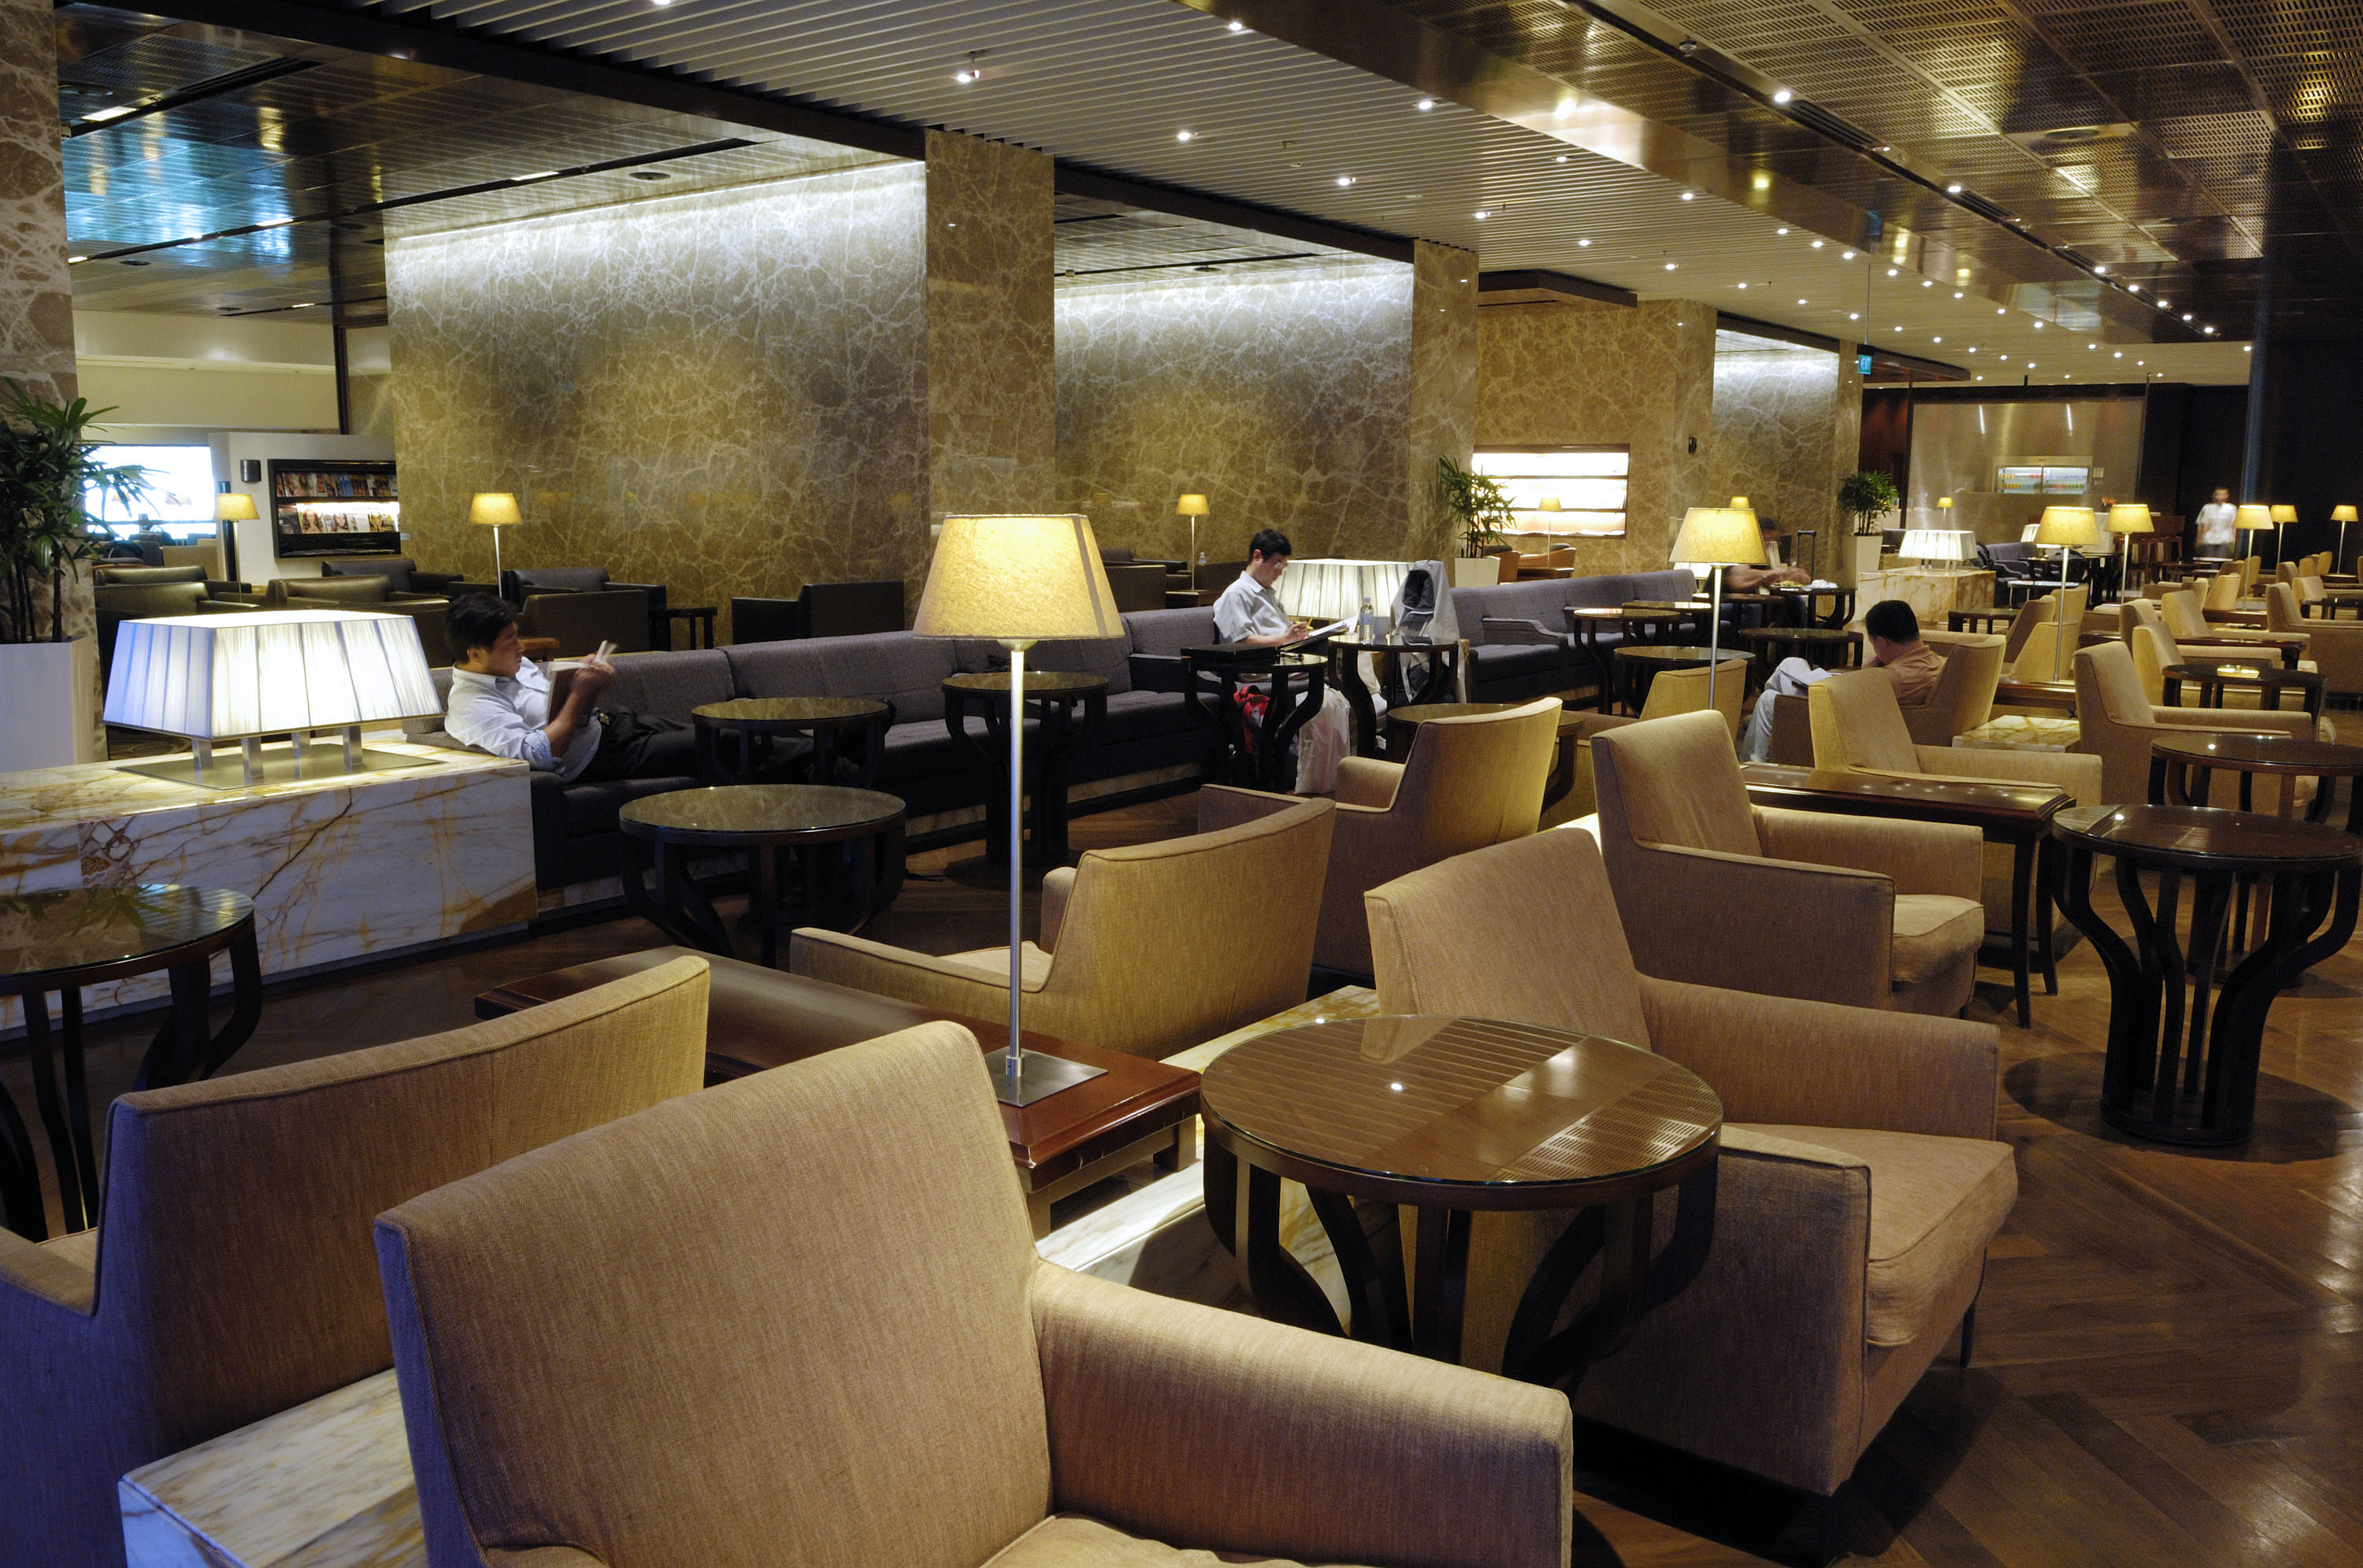 Many of the lounges are only open to the very wealthy